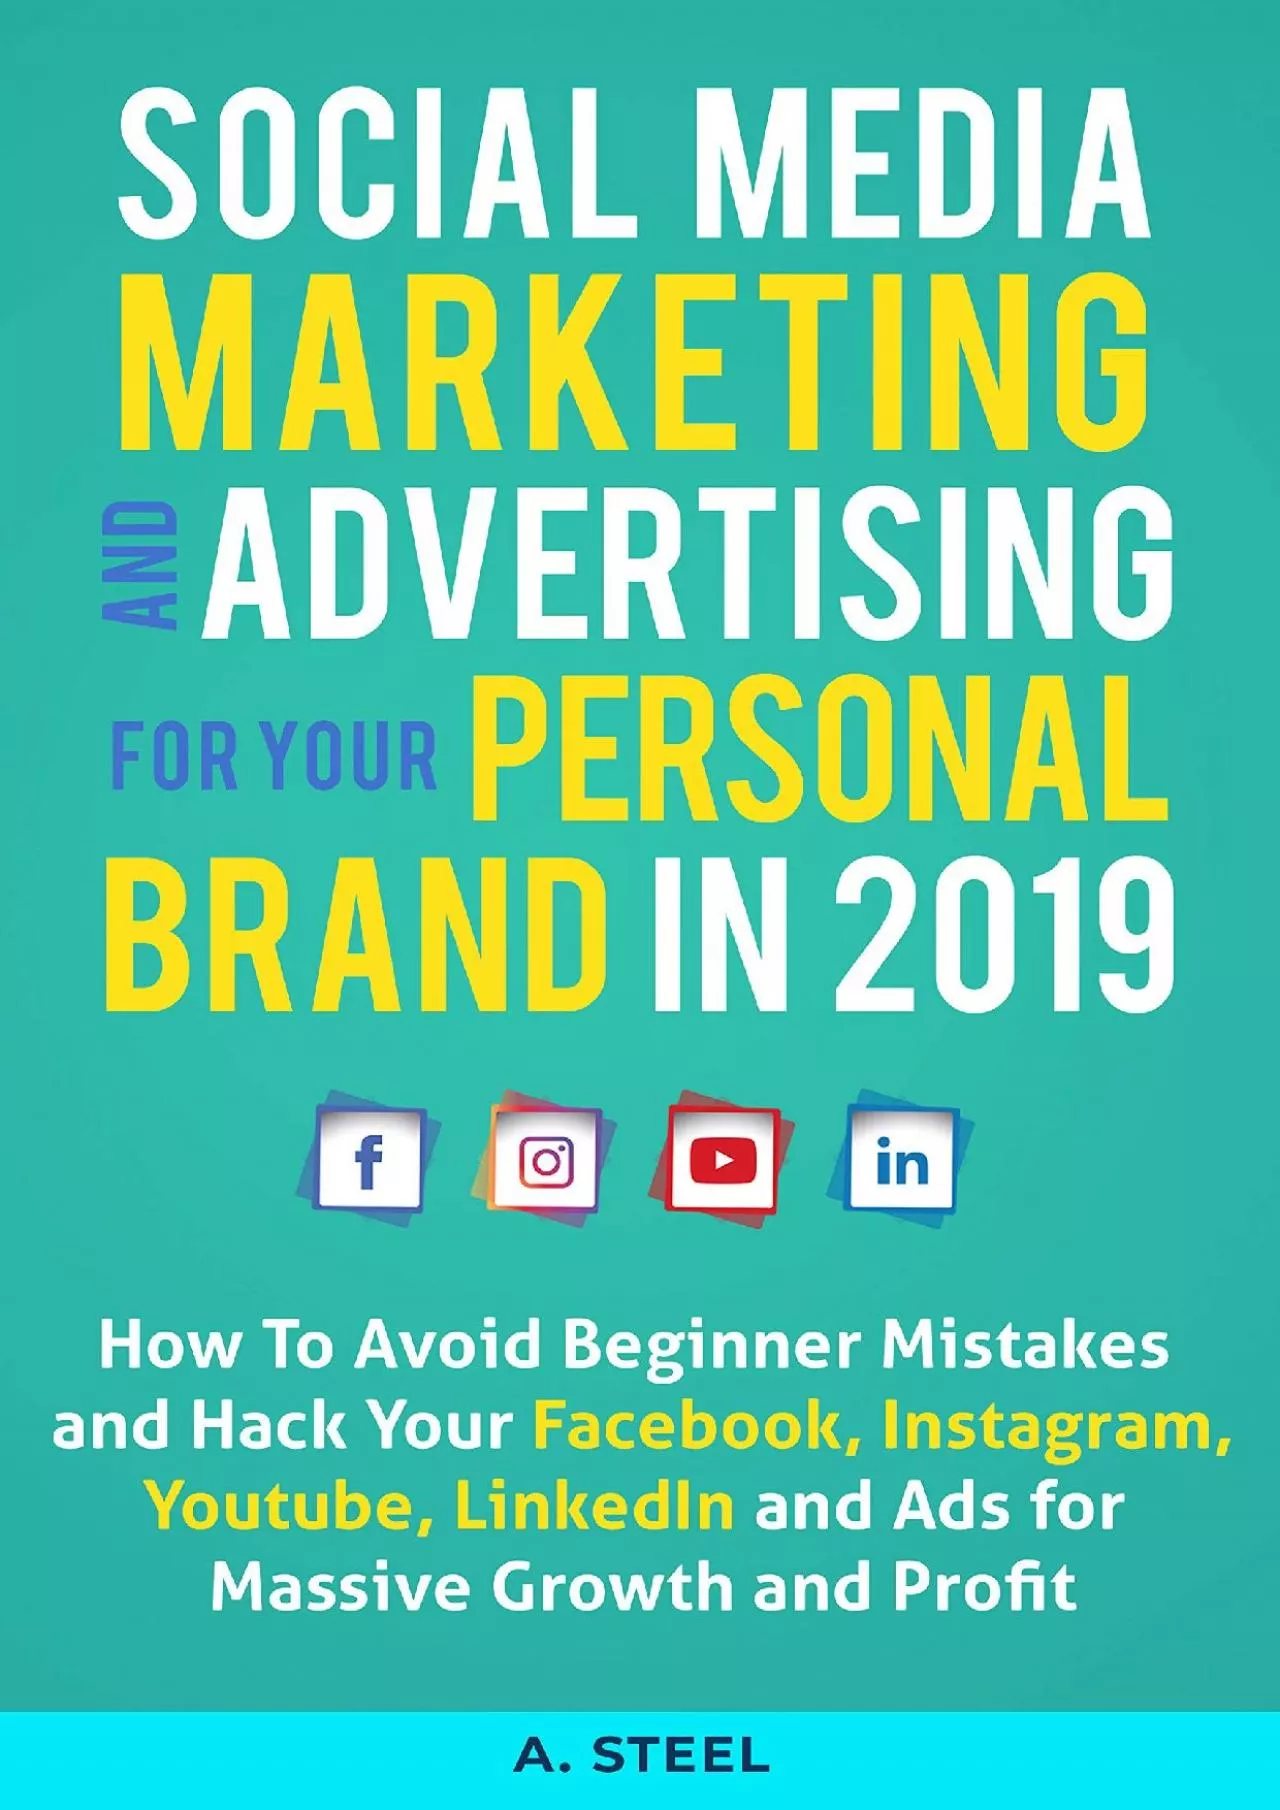 Social Media Marketing and Advertising for Your Personal Brand in 2019: How To Avoid Beginner